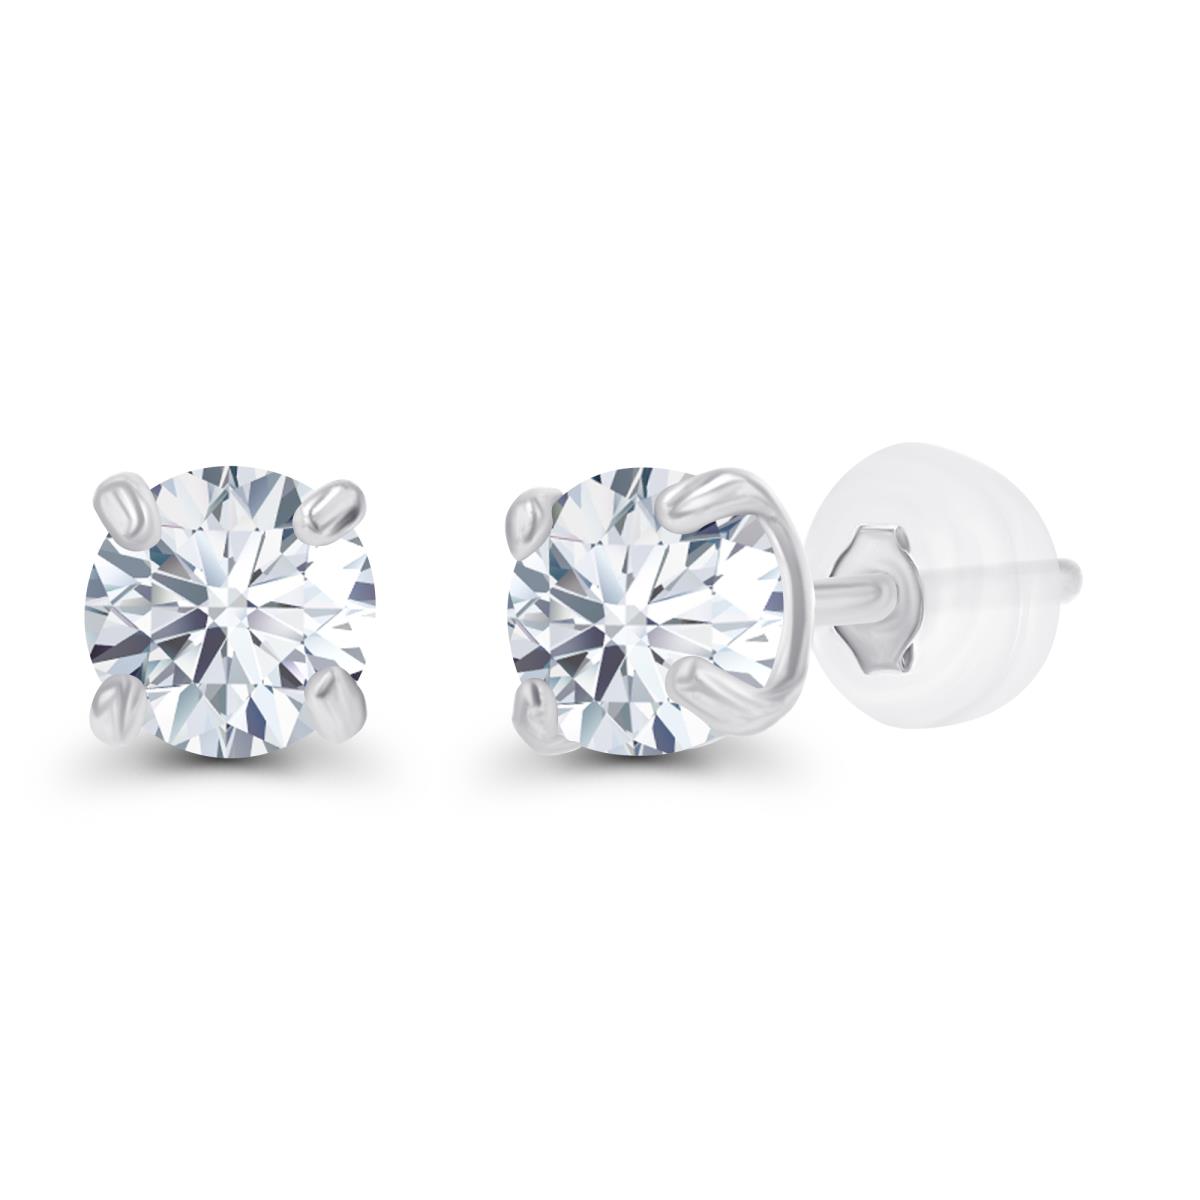 10K White Gold 3mm Round White Topaz Stud Earring with Silicone Back